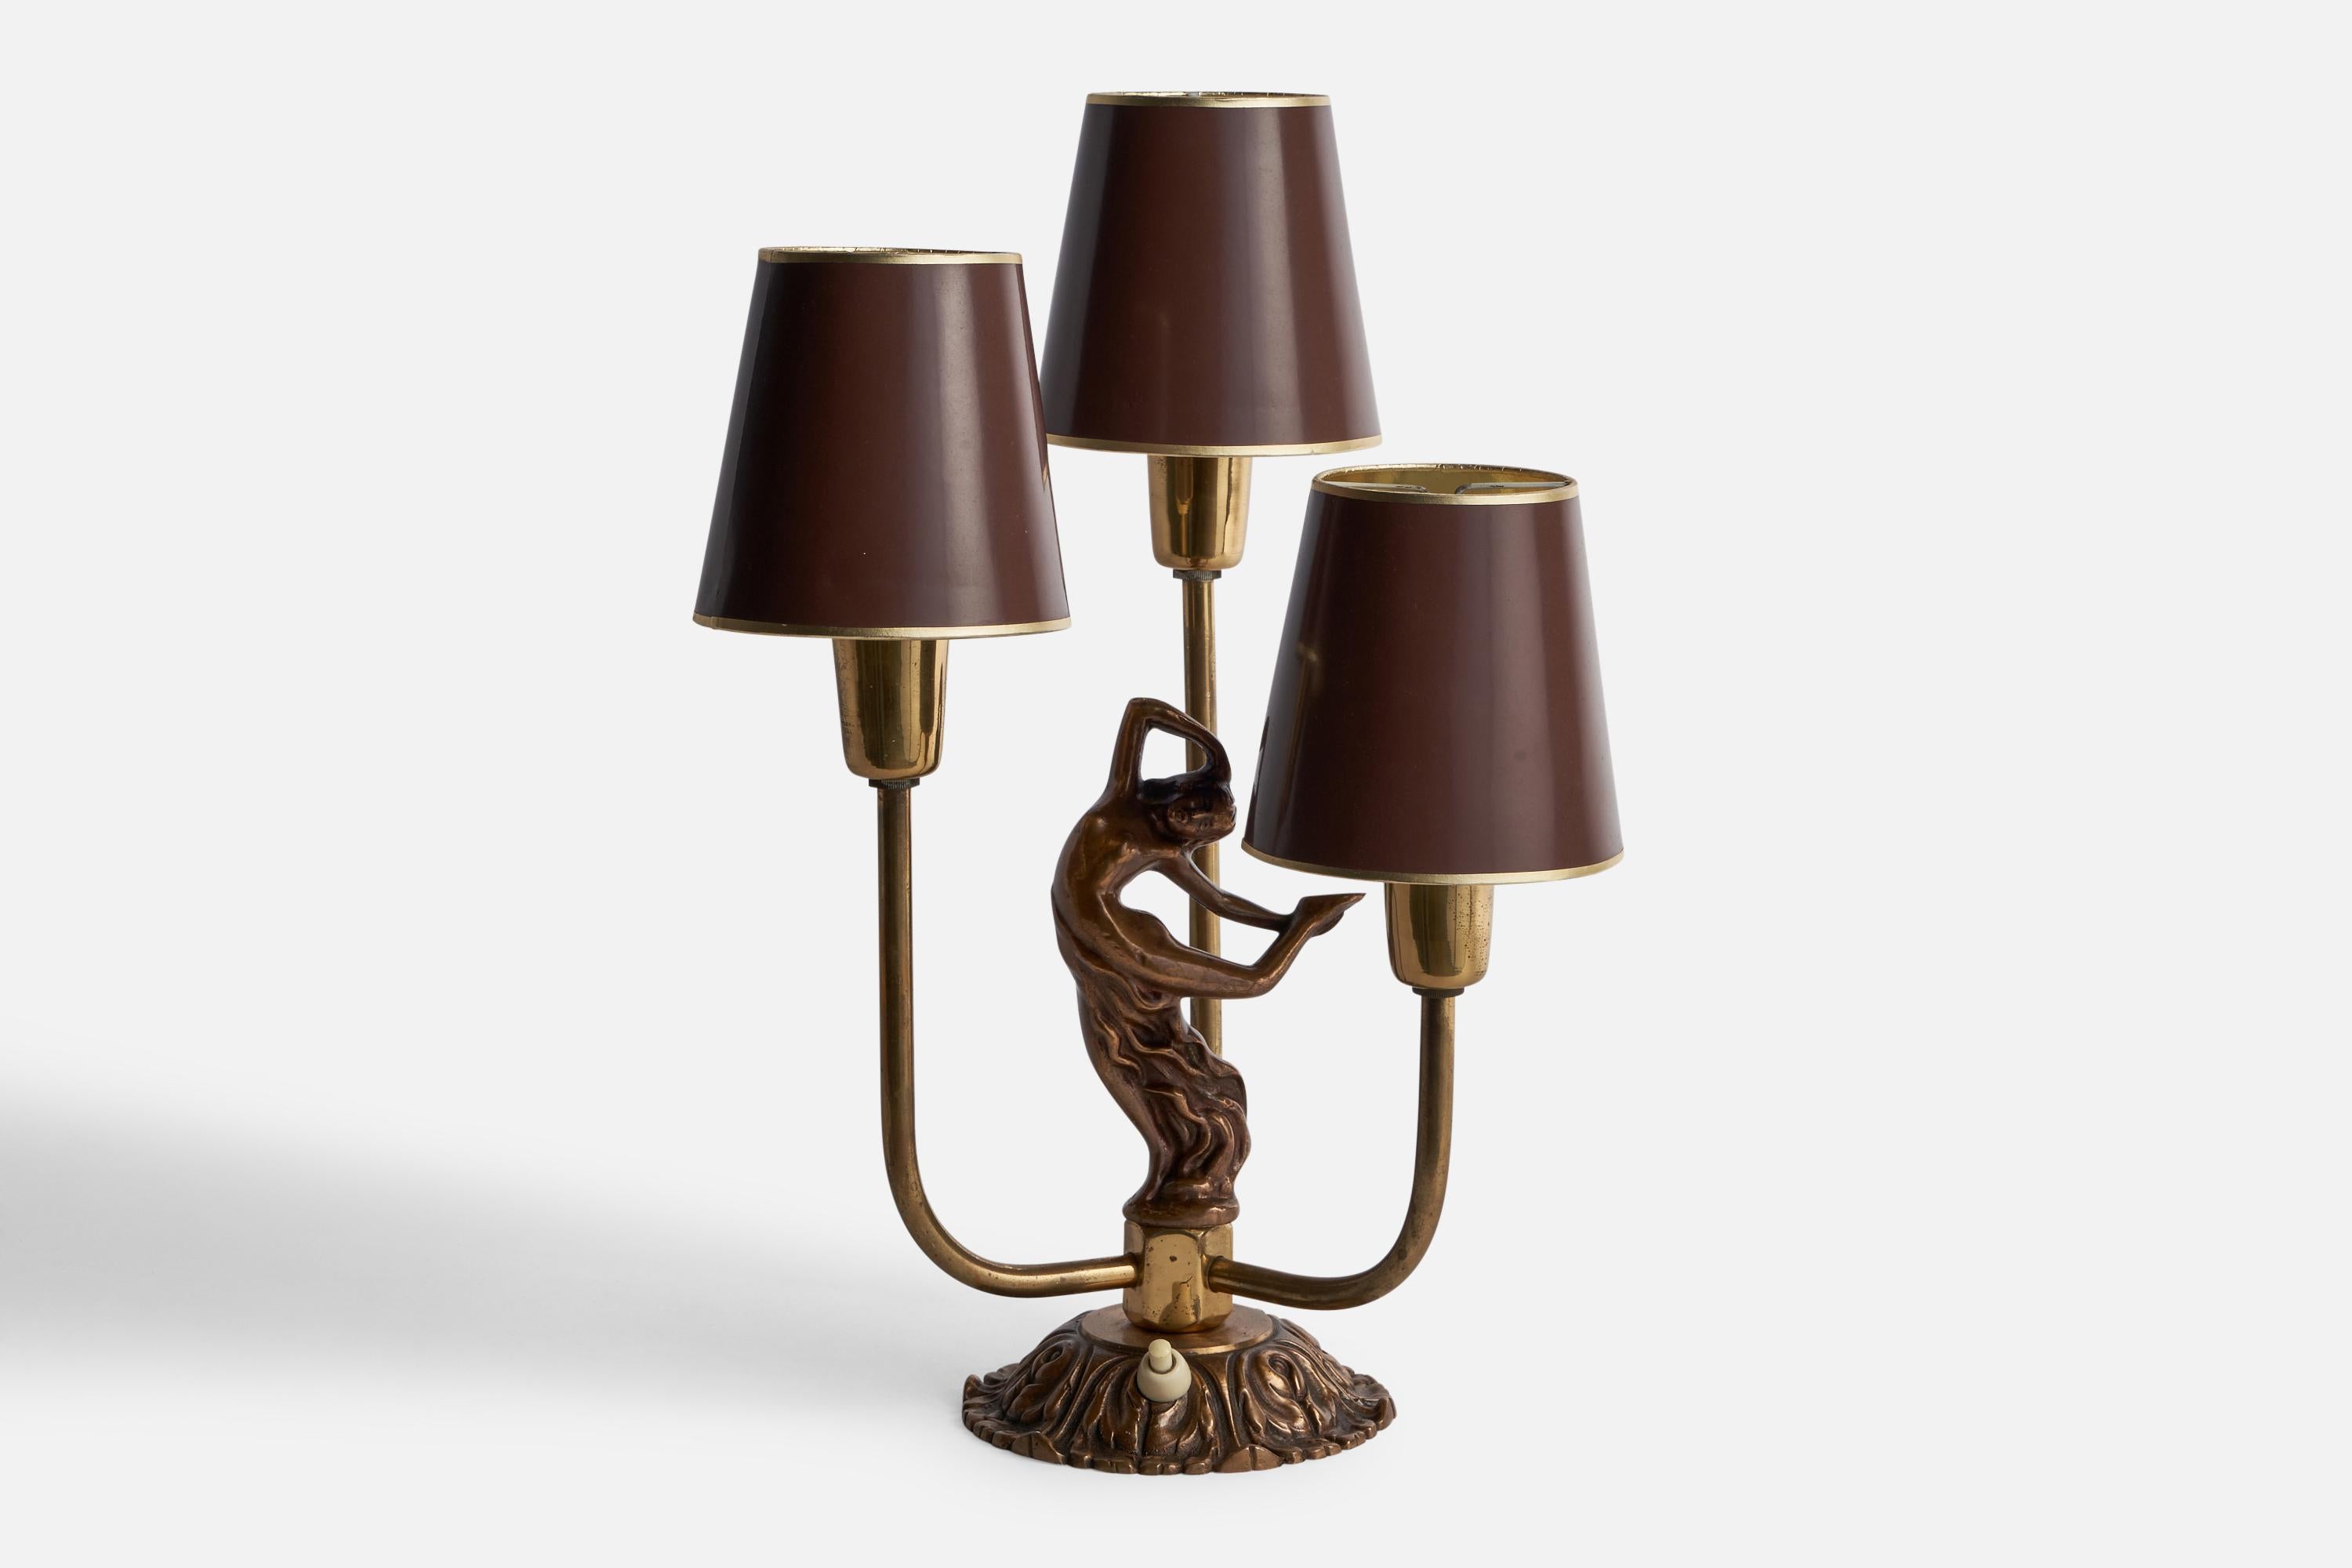 A three-armed brass and brown-lacquered paper table lamp designed and produced in Sweden, 1930s.

Overall Dimensions (inches): 14.5” H x 10.5” W x 9” D
Bulb Specifications: E-14 Bulbs
Number of Sockets: 3
All lighting will be converted for US usage.